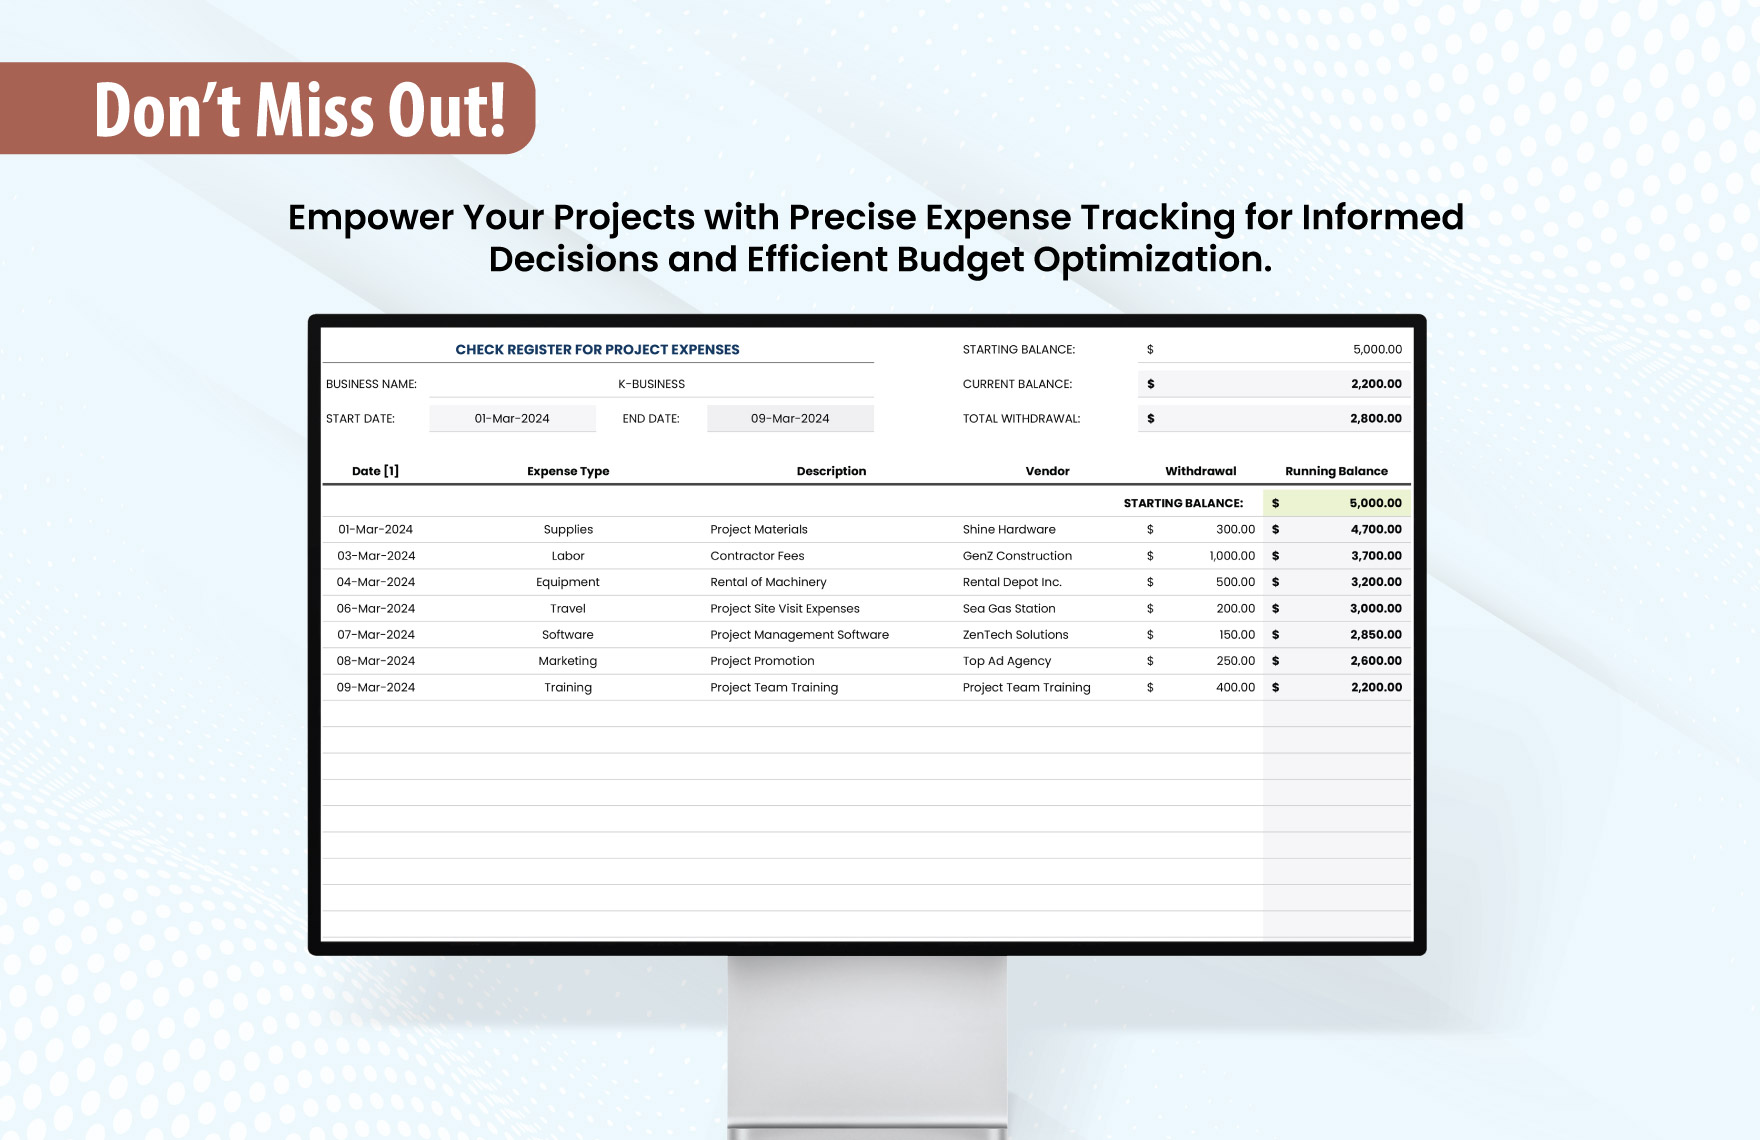 Check Register for Project Expenses Template